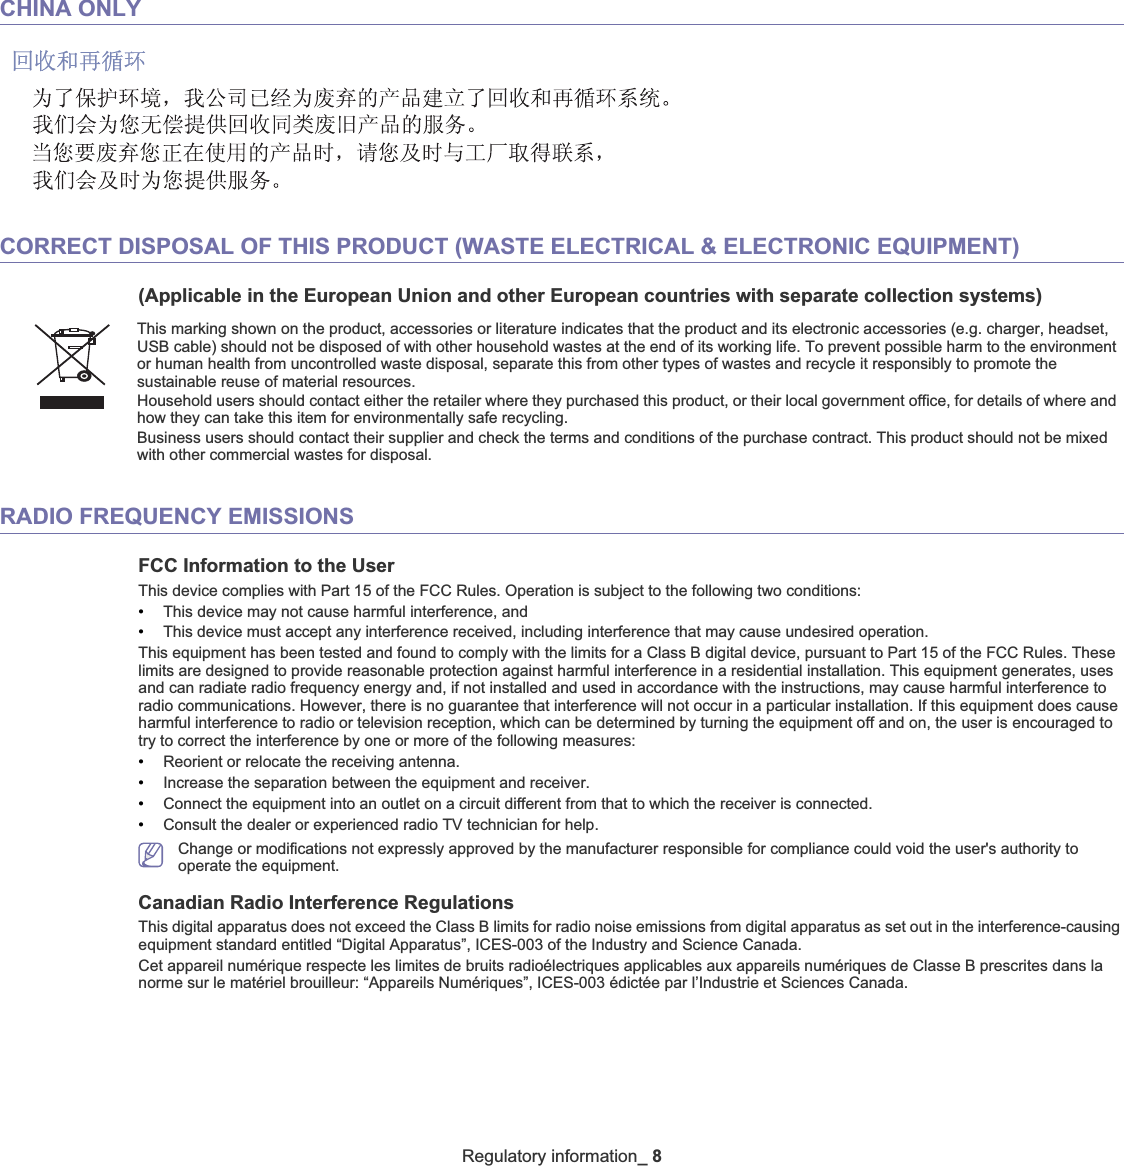 Regulatory information_8CHINA ONLYCORRECT DISPOSAL OF THIS PRODUCT (WASTE ELECTRICAL &amp; ELECTRONIC EQUIPMENT)(Applicable in the European Union and other European countries with separate collection systems)RADIO FREQUENCY EMISSIONSFCC Information to the UserThis device complies with Part 15 of the FCC Rules. Operation is subject to the following two conditions: •This device may not cause harmful interference, and•This device must accept any interference received, including interference that may cause undesired operation.This equipment has been tested and found to comply with the limits for a Class B digital device, pursuant to Part 15 of the FCC Rules. These limits are designed to provide reasonable protection against harmful interference in a residential installation. This equipment generates, uses and can radiate radio frequency energy and, if not installed and used in accordance with the instructions, may cause harmful interference to radio communications. However, there is no guarantee that interference will not occur in a particular installation. If this equipment does cause harmful interference to radio or television reception, which can be determined by turning the equipment off and on, the user is encouraged to try to correct the interference by one or more of the following measures:•Reorient or relocate the receiving antenna.•Increase the separation between the equipment and receiver.•Connect the equipment into an outlet on a circuit different from that to which the receiver is connected.•Consult the dealer or experienced radio TV technician for help.Change or modifications not expressly approved by the manufacturer responsible for compliance could void the user&apos;s authority tooperate the equipment.Canadian Radio Interference RegulationsThis digital apparatus does not exceed the Class B limits for radio noise emissions from digital apparatus as set out in the interference-causing equipment standard entitled “Digital Apparatus”, ICES-003 of the Industry and Science Canada.Cet appareil numérique respecte les limites de bruits radioélectriques applicables aux appareils numériques de Classe B prescrites dans la norme sur le matériel brouilleur: “Appareils Numériques”, ICES-003 édictée par l’Industrie et Sciences Canada.This marking shown on the product, accessories or literature indicates that the product and its electronic accessories (e.g. charger, headset, USB cable) should not be disposed of with other household wastes at the end of its working life. To prevent possible harm to the environment or human health from uncontrolled waste disposal, separate this from other types of wastes and recycle it responsibly to promote the sustainable reuse of material resources. Household users should contact either the retailer where they purchased this product, or their local government office, for details of where and how they can take this item for environmentally safe recycling. Business users should contact their supplier and check the terms and conditions of the purchase contract. This product should not be mixed with other commercial wastes for disposal.